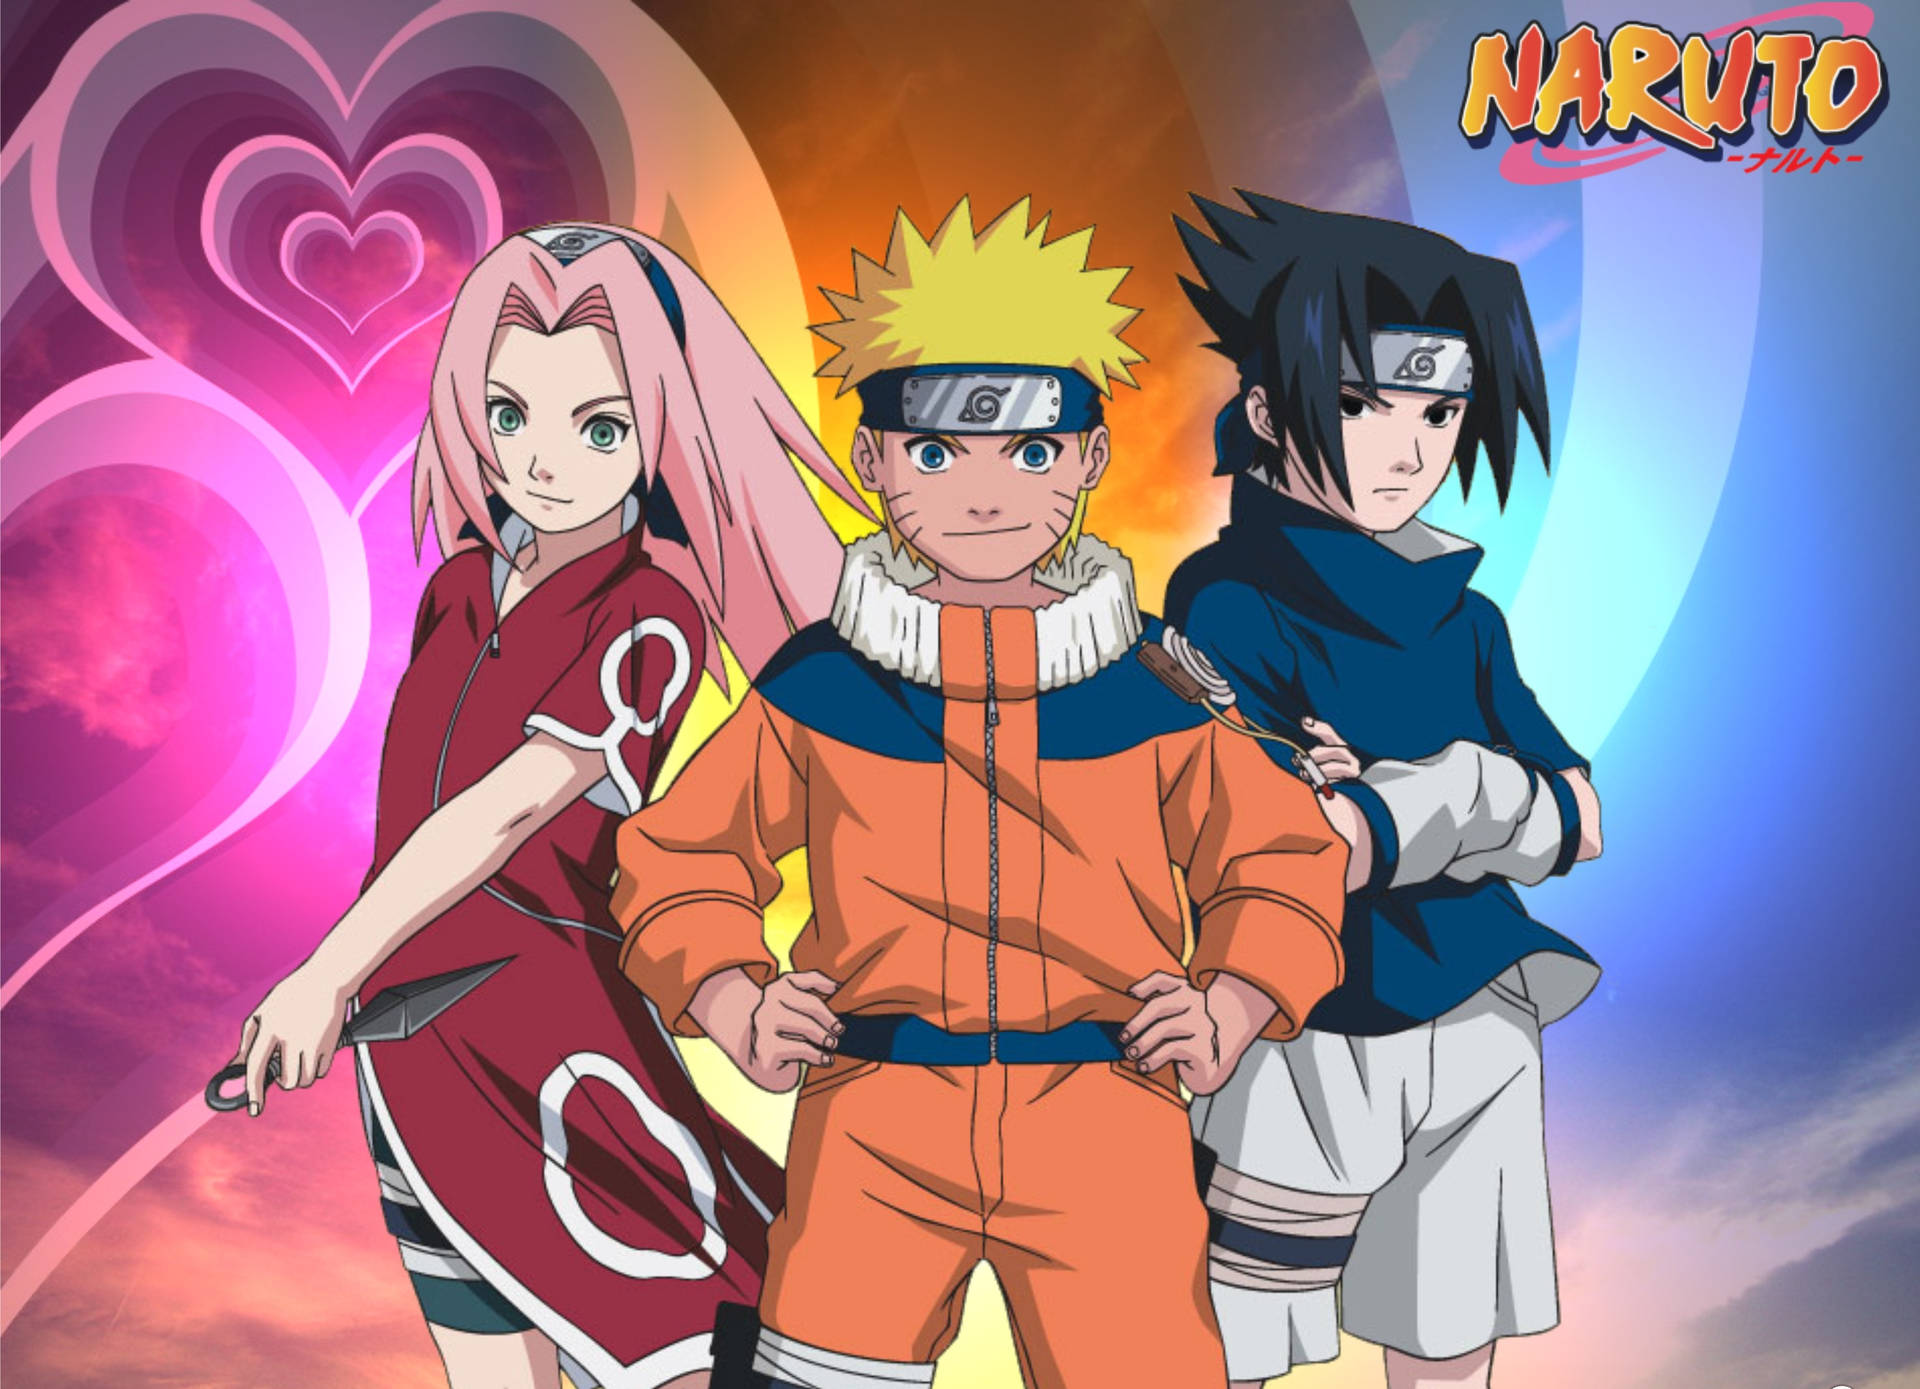 Free Naruto Poster Wallpaper Downloads, [100+] Naruto Poster Wallpapers for  FREE 